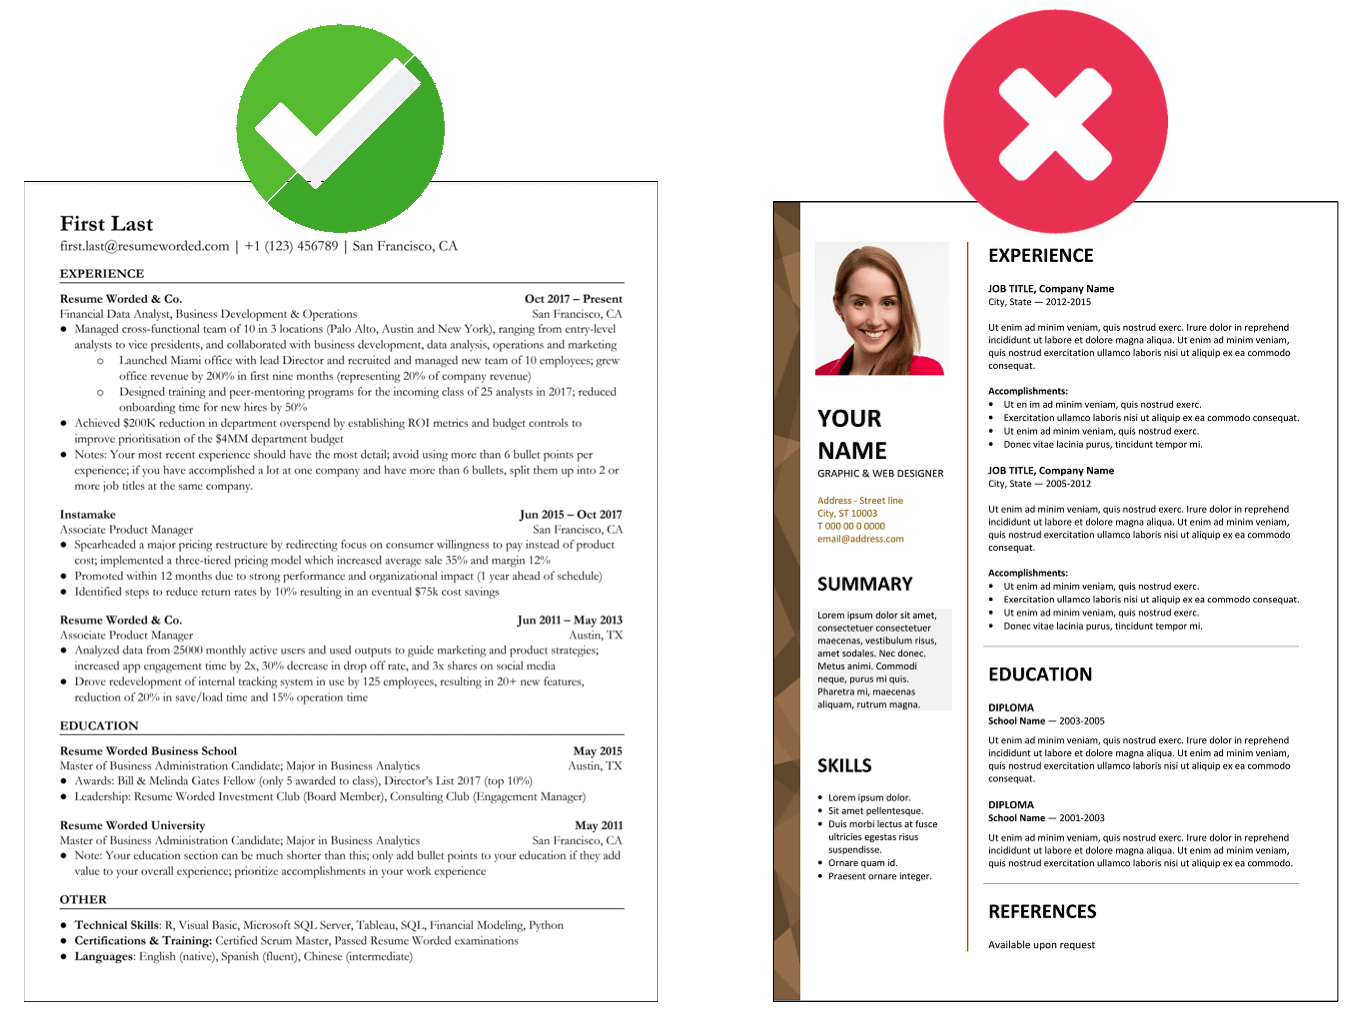 Use Word or Google Docs resume template for your draft, then save it as PDF